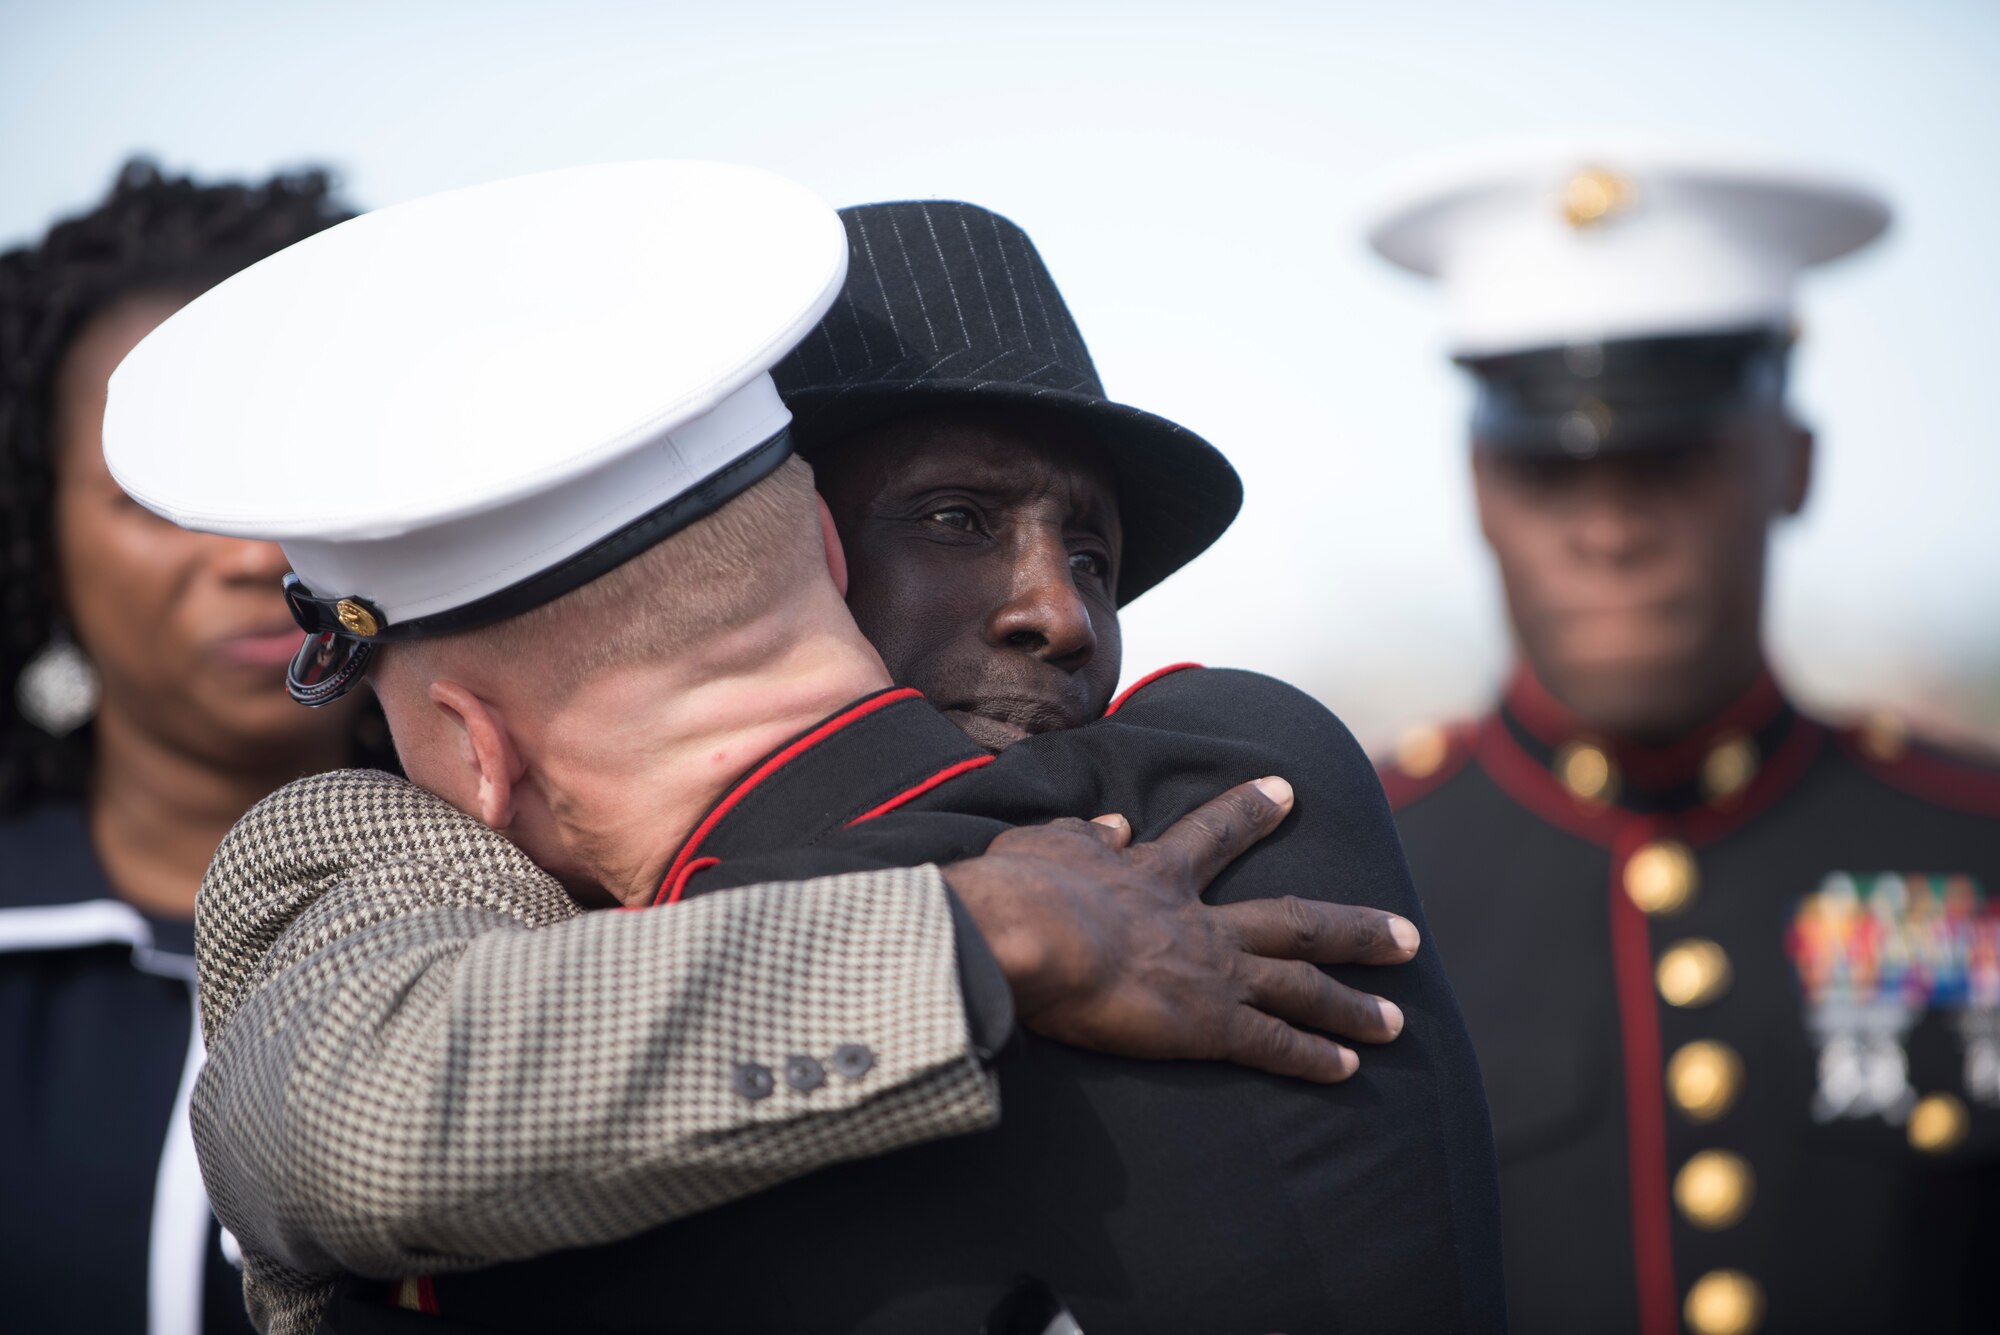 The father of a fallen Marine hugs Lance Cpl. Kyle Pierce, Alpha Company administrative specialist, Headquarters and support Battalion, Marine Corps Installations East, during a dignified transfer at the Phoenix Sky Harbor International Airport in Phoenix May 17, 2019.